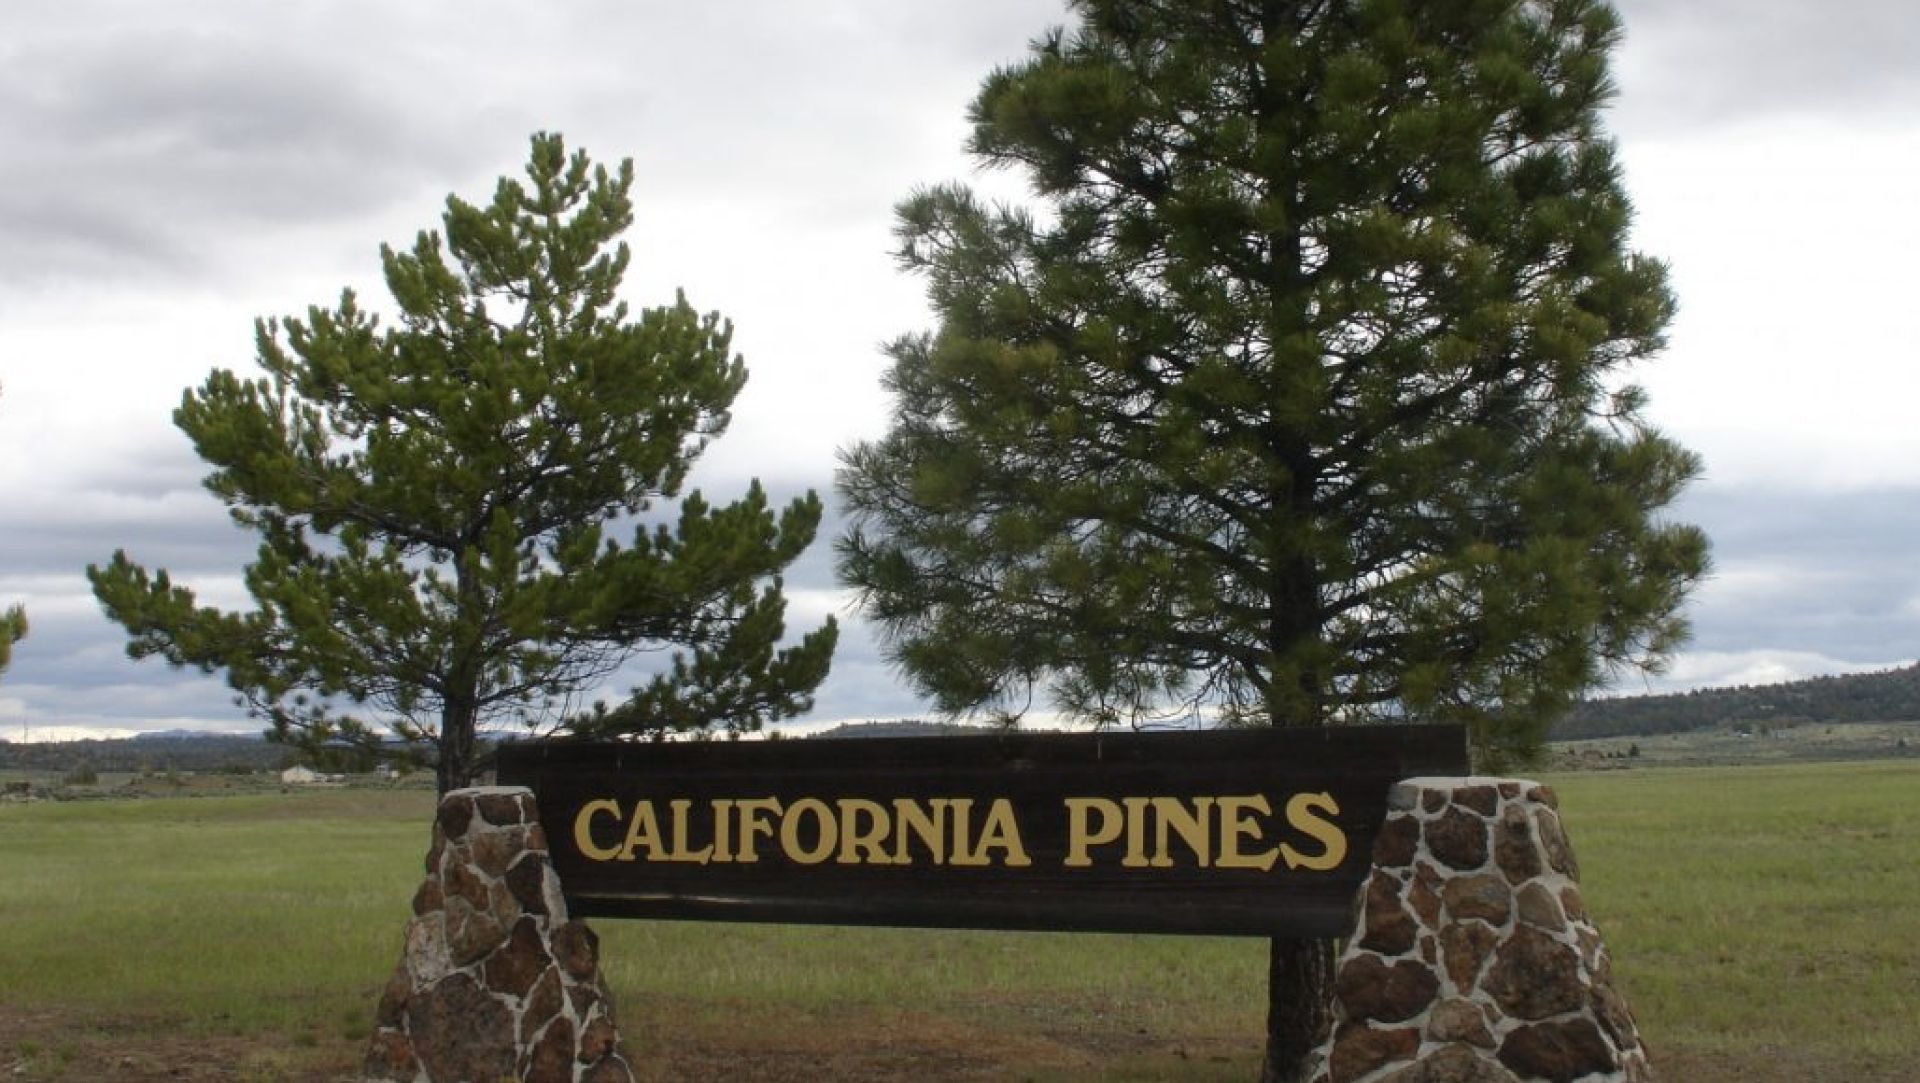 Build Your Home on an Acre of Peaceful California Pines! - Bild 12 aus 18